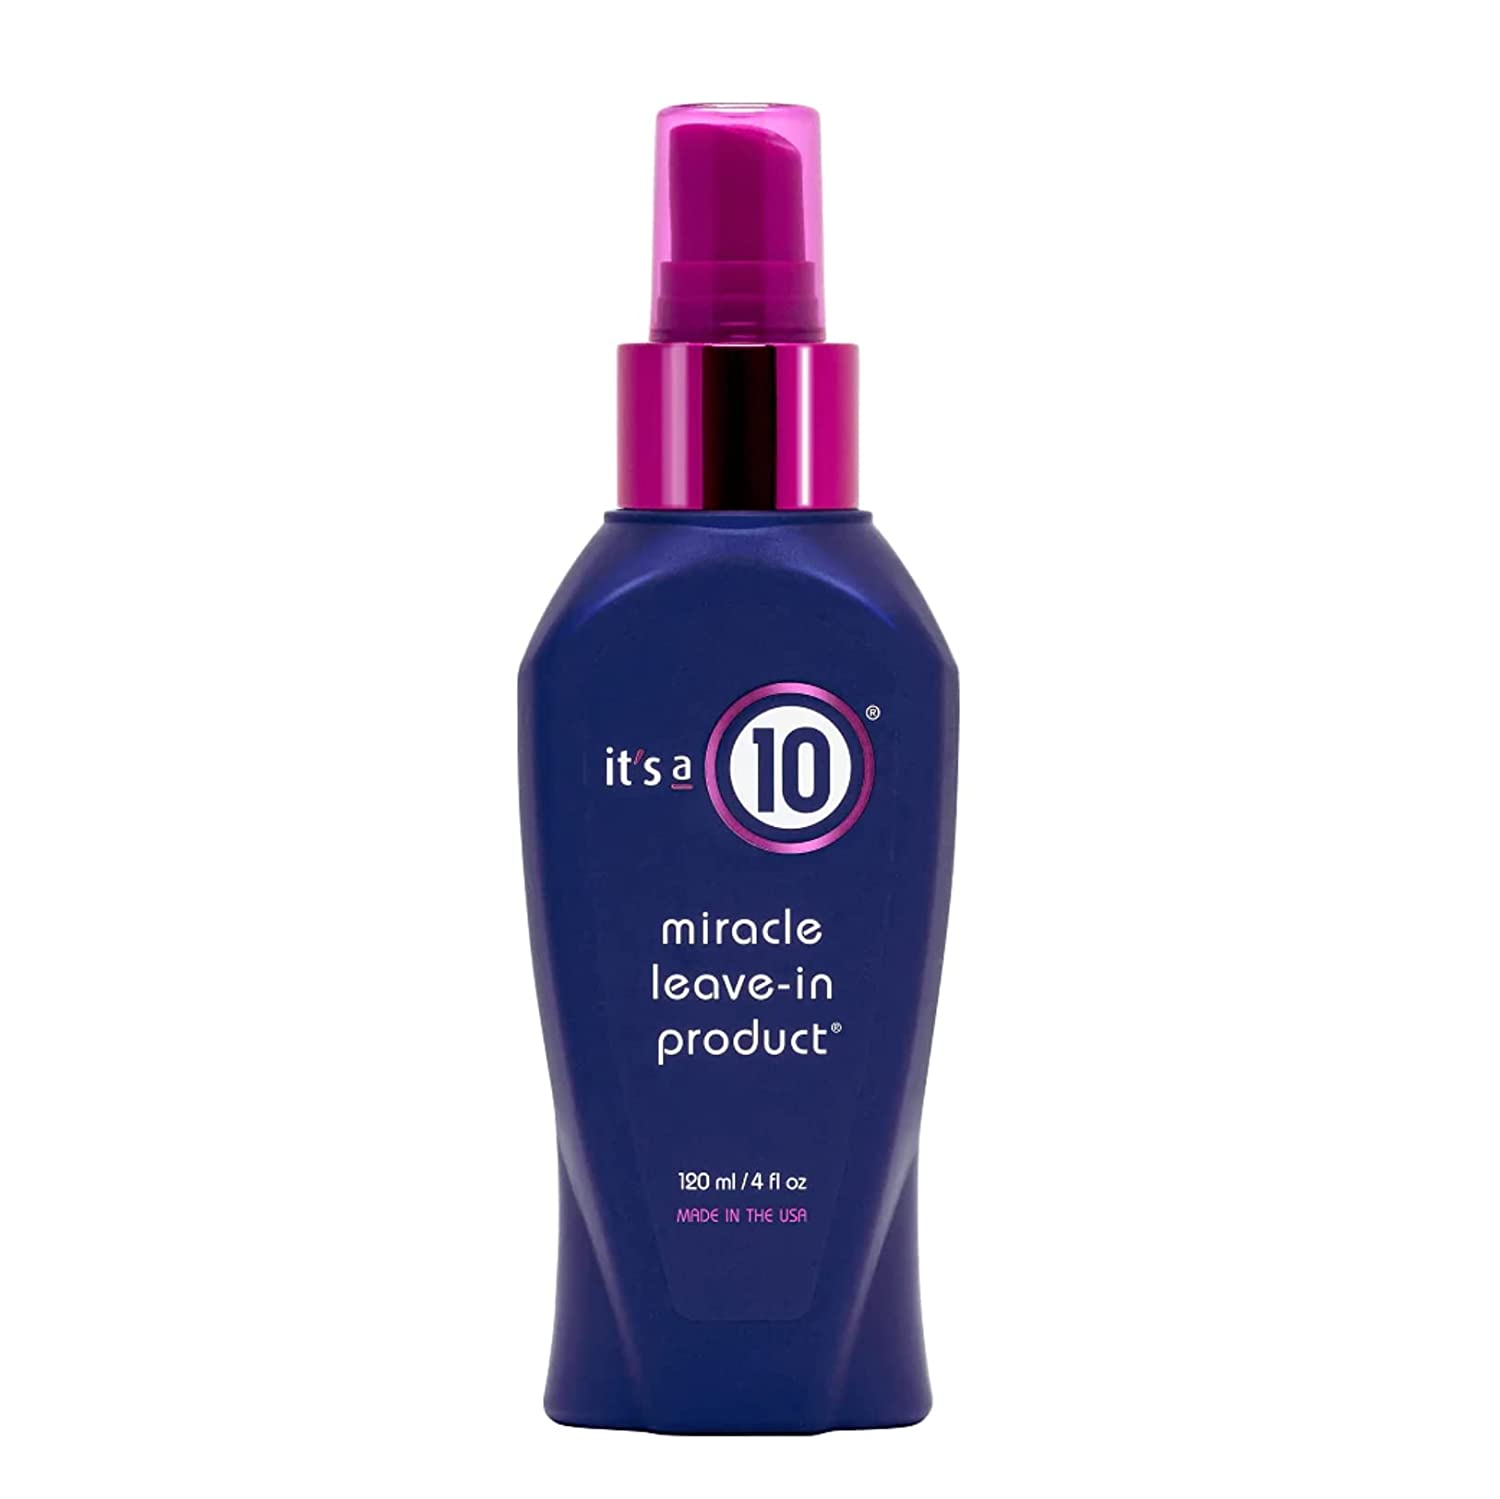 It’s A 10 Miracle Leave-In Conditioner